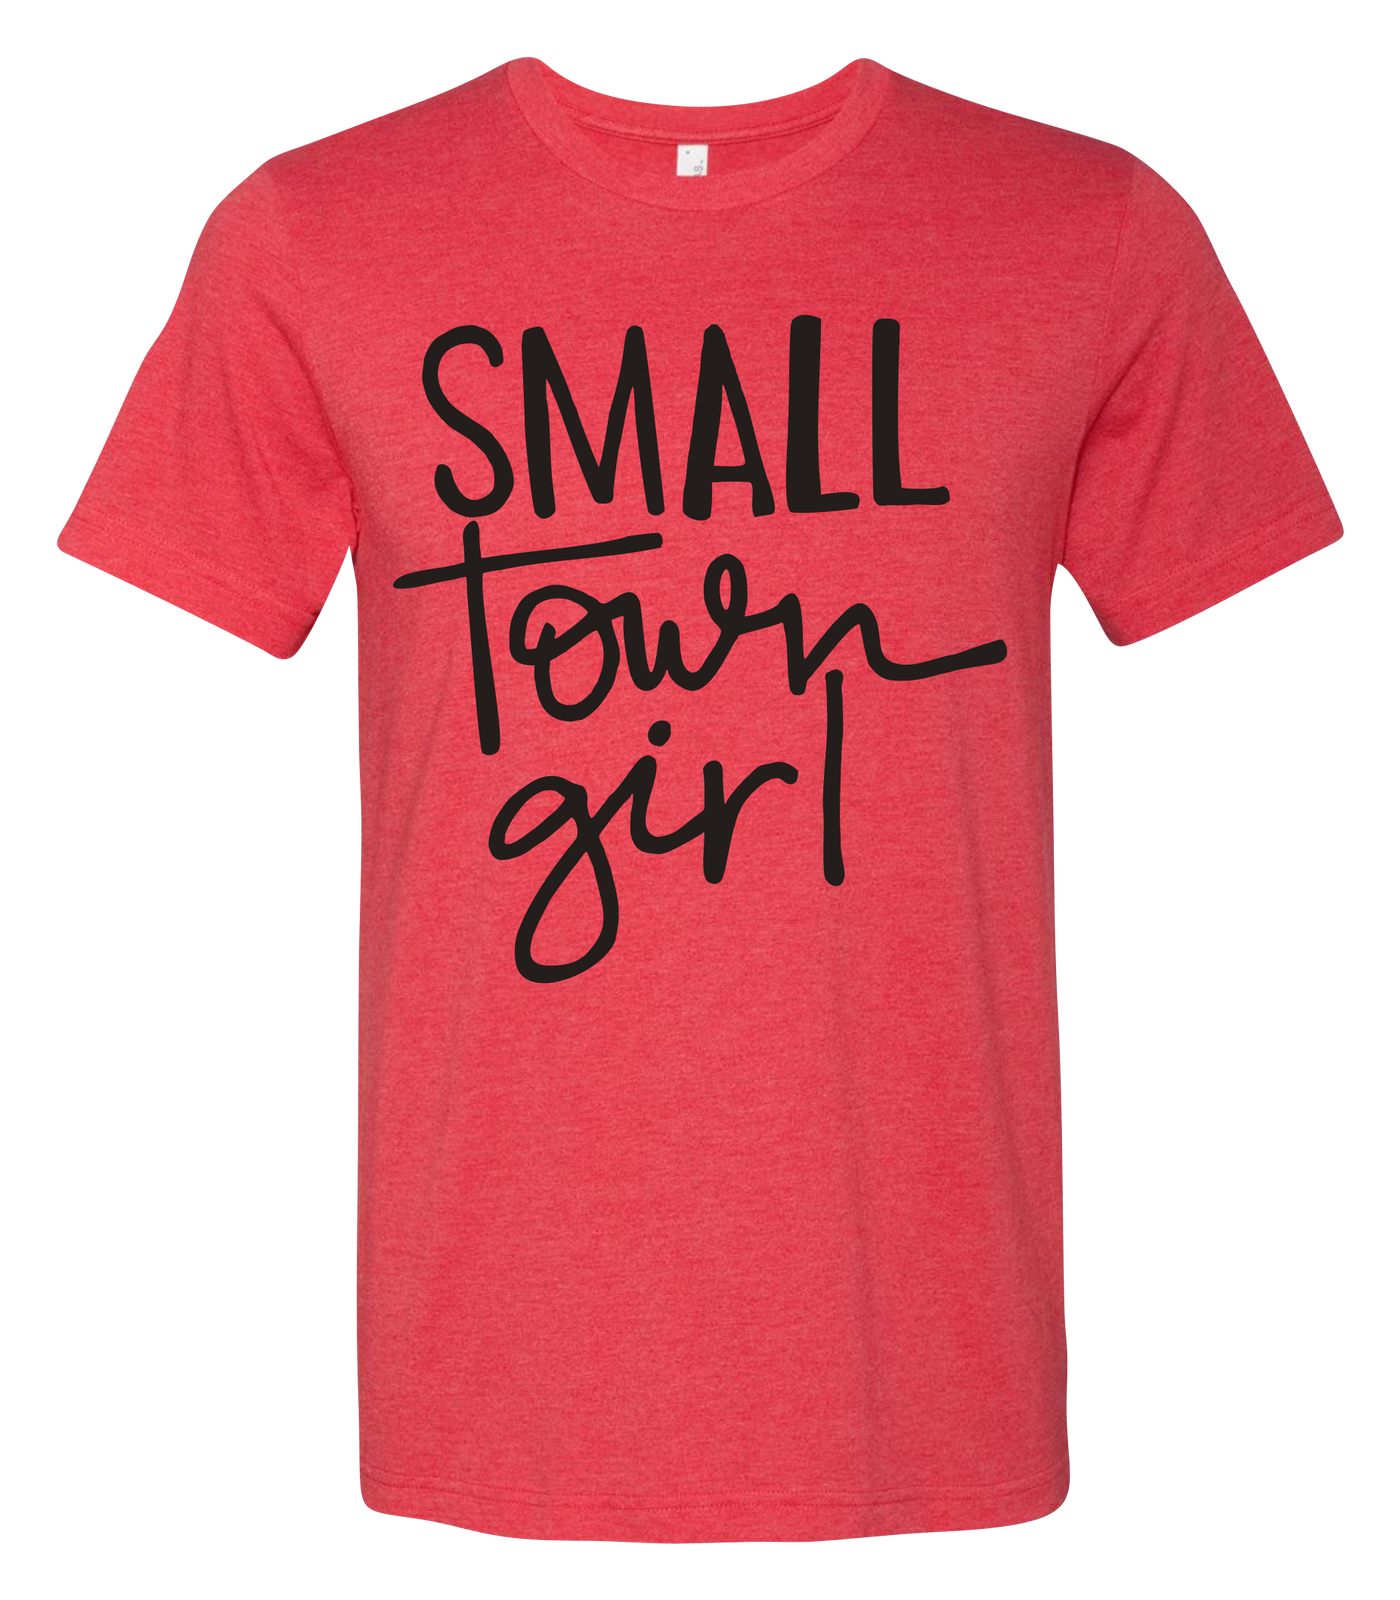 Small Town Girl Short Sleeve Graphic T-shirt